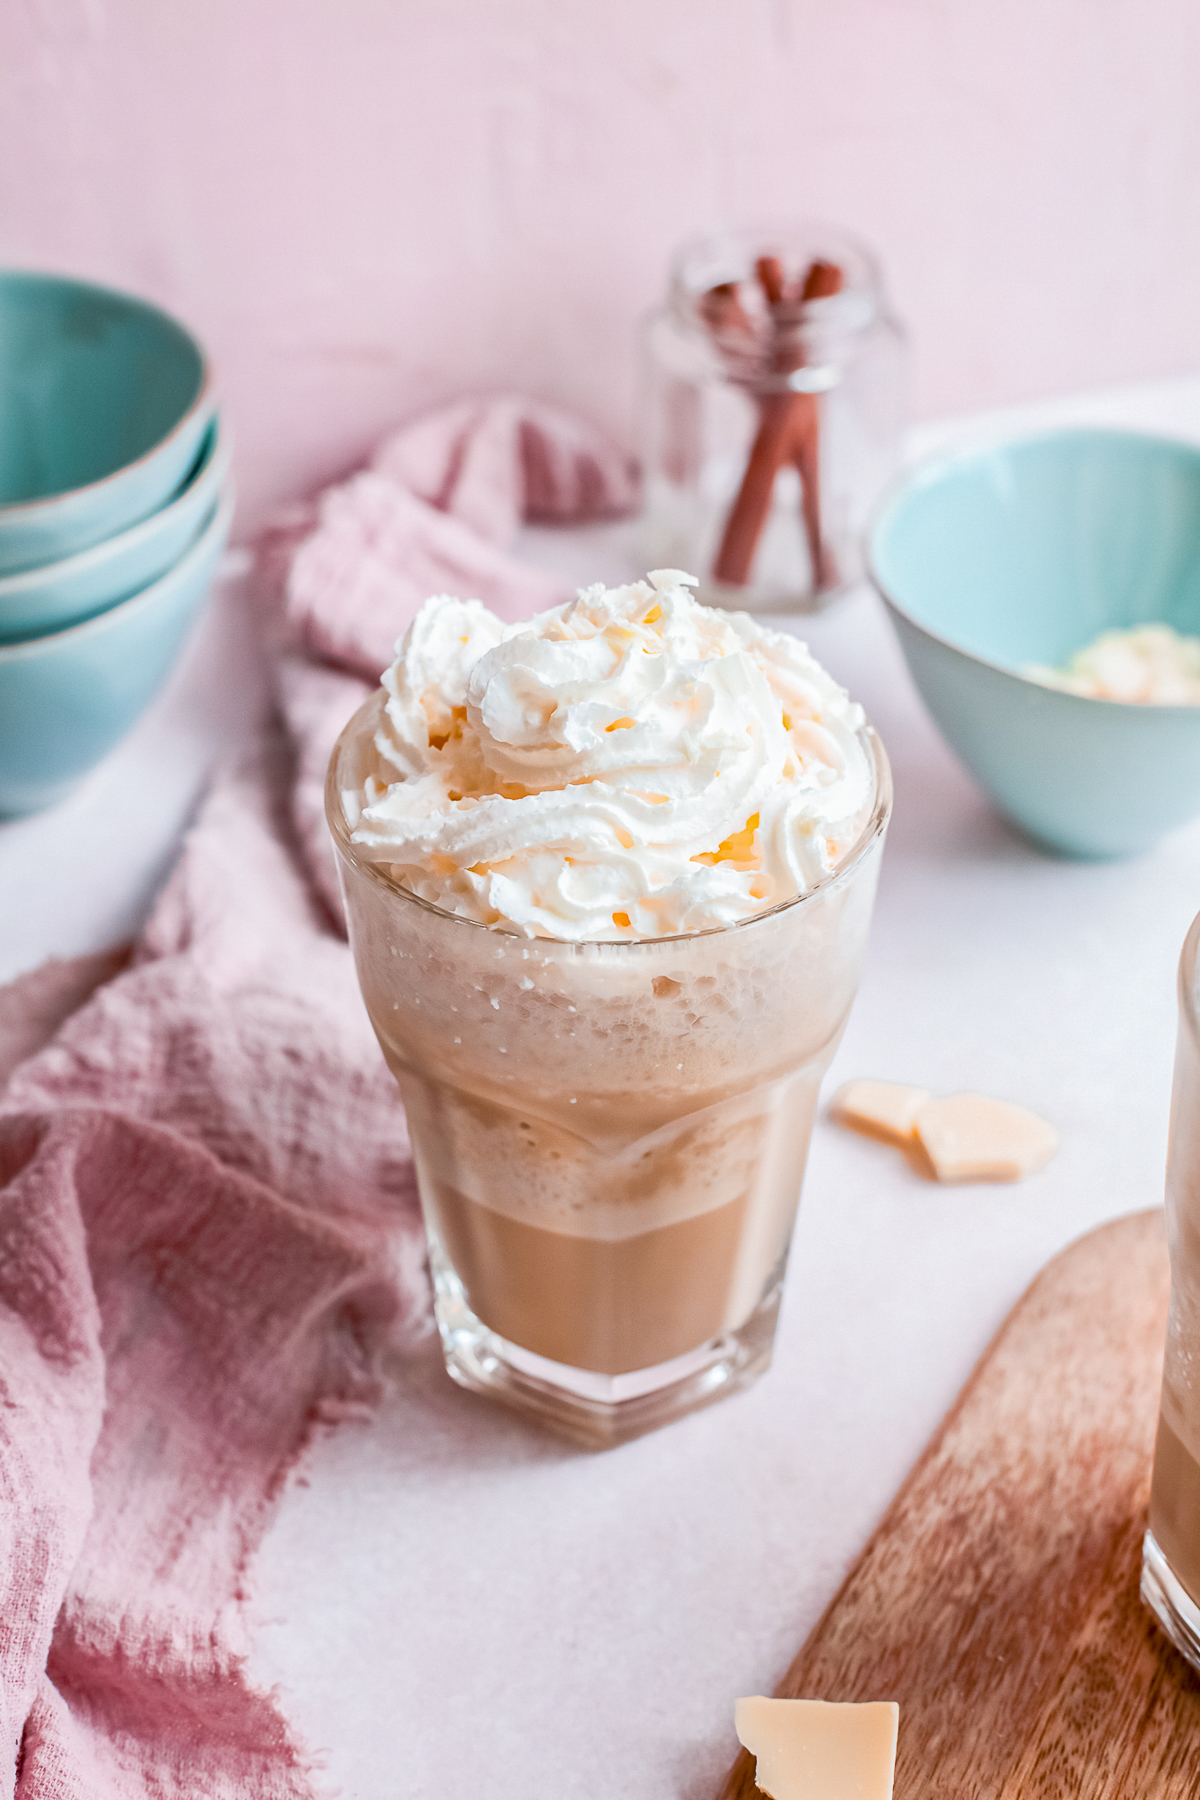 One Frappuccino topped with whipped cream.